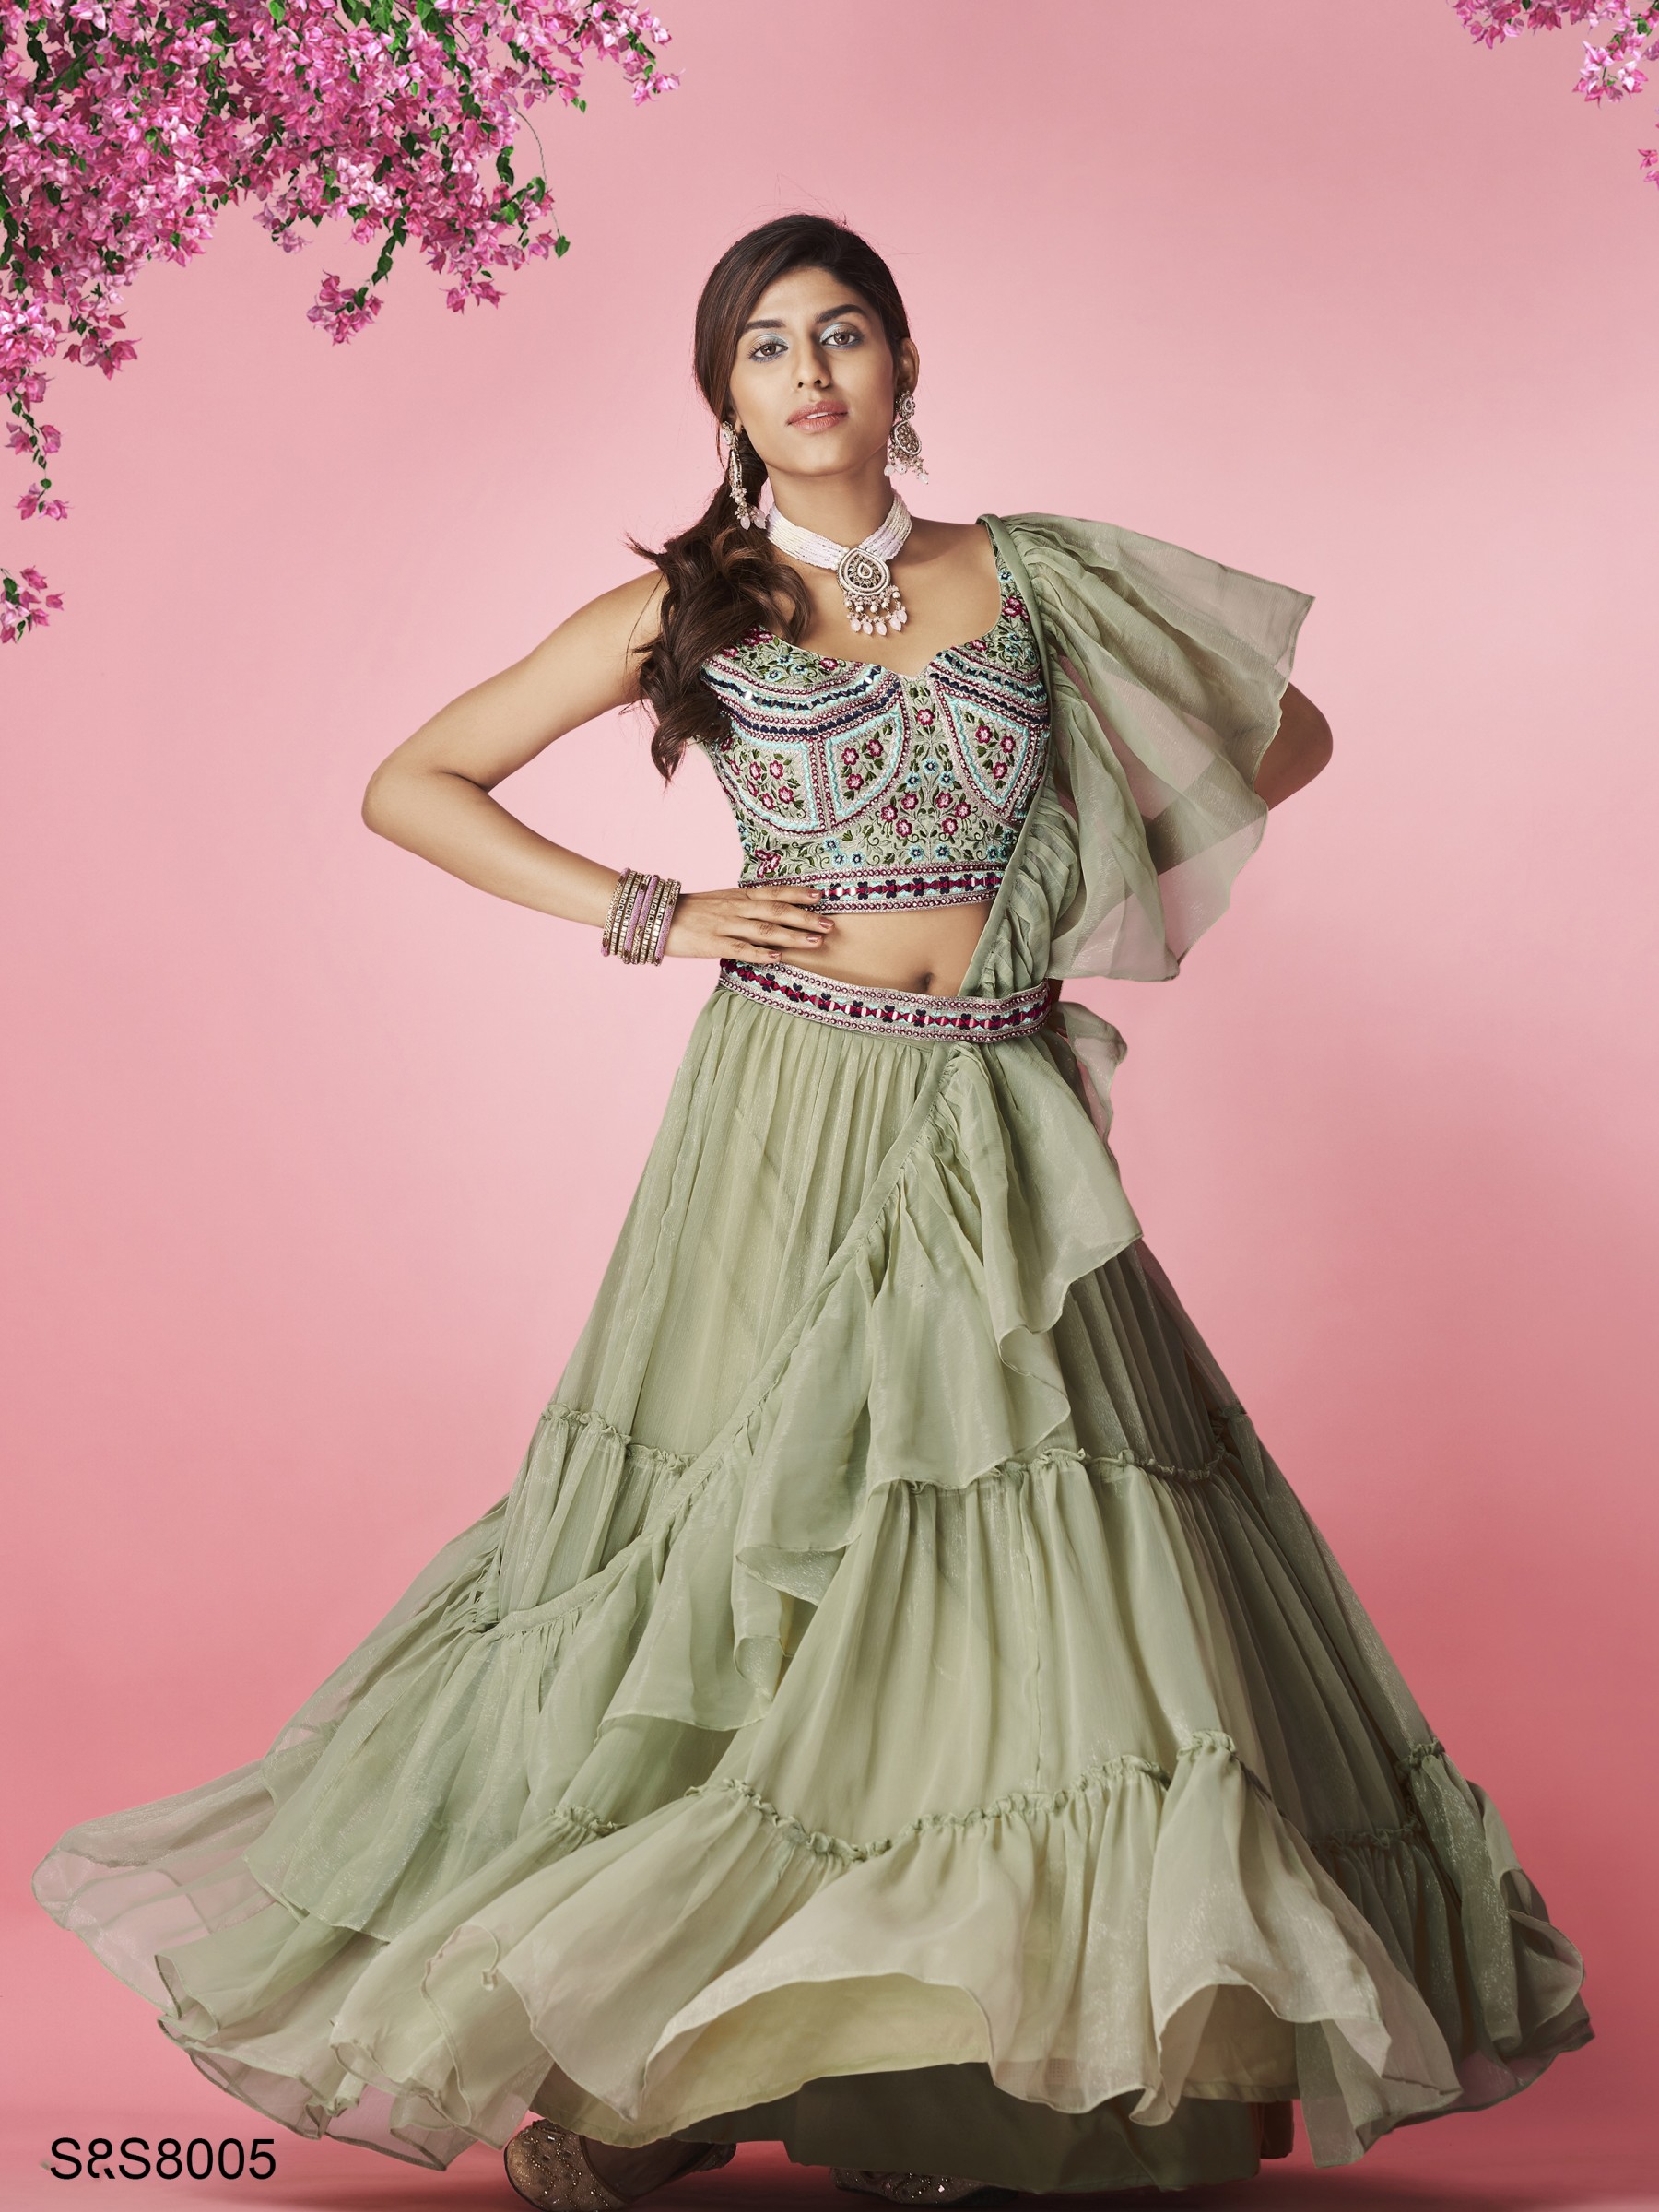 Chiffon Fabrics Party Wear Lehenga in Olive Green Color With Embroidery Work 